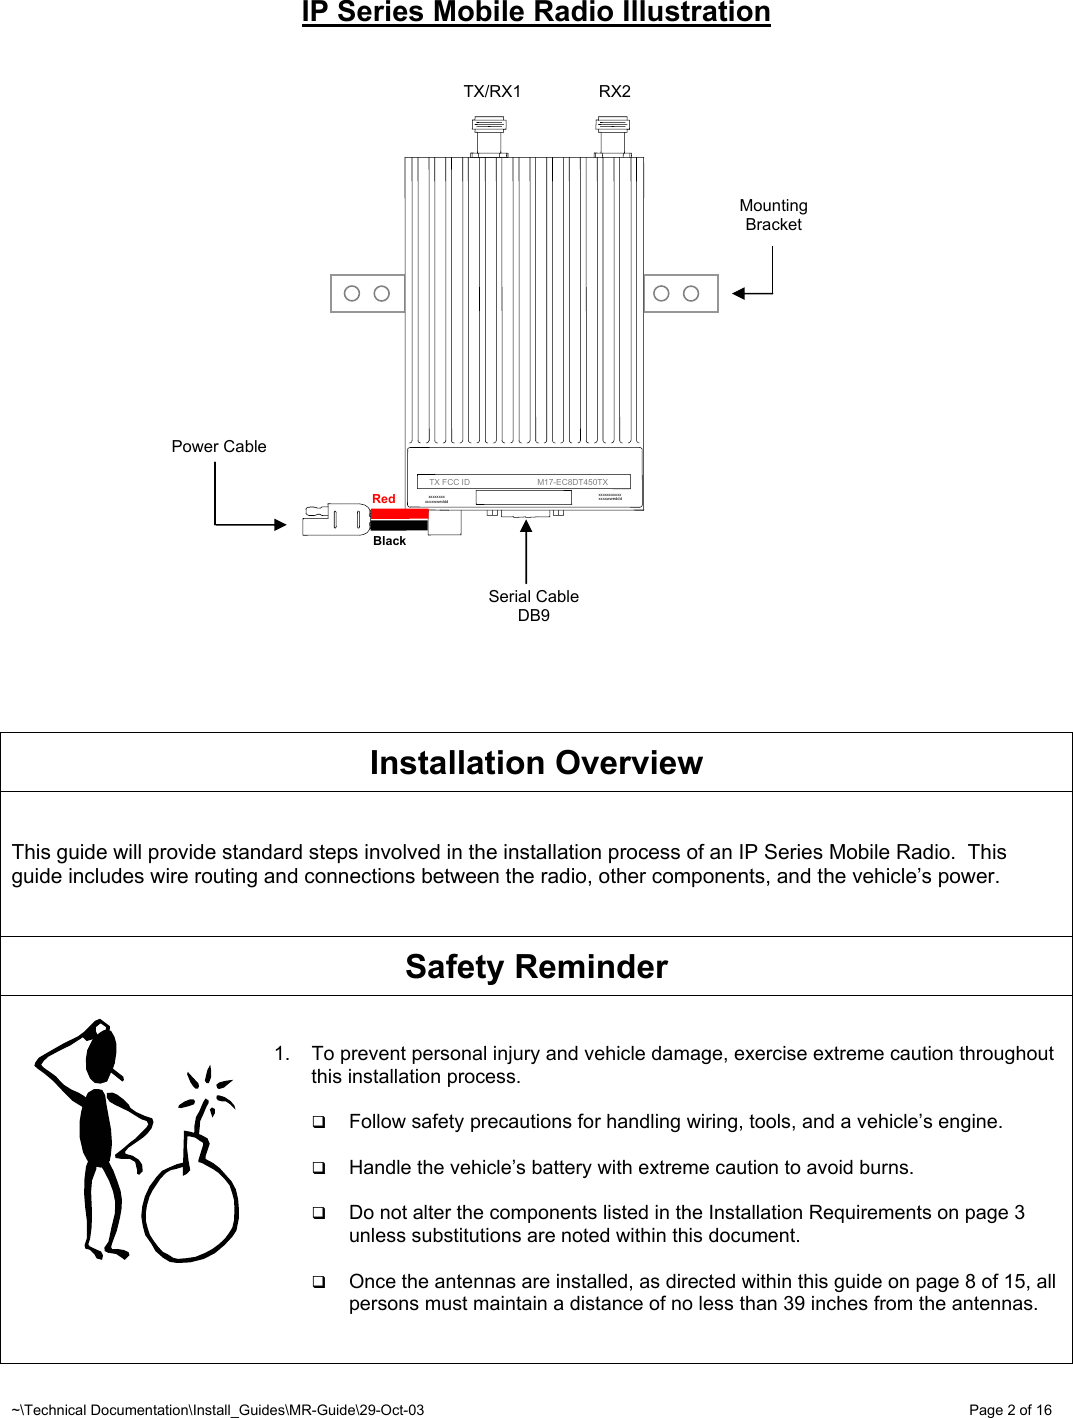 ~\Technical Documentation\Install_Guides\MR-Guide\29-Oct-03   Page 2 of 16 IP Series Mobile Radio Illustration                      Installation Overview   This guide will provide standard steps involved in the installation process of an IP Series Mobile Radio.  This guide includes wire routing and connections between the radio, other components, and the vehicle’s power.    Safety Reminder   1.  To prevent personal injury and vehicle damage, exercise extreme caution throughout this installation process.   Follow safety precautions for handling wiring, tools, and a vehicle’s engine.   Handle the vehicle’s battery with extreme caution to avoid burns.   Do not alter the components listed in the Installation Requirements on page 3 unless substitutions are noted within this document.   Once the antennas are installed, as directed within this guide on page 8 of 15, all persons must maintain a distance of no less than 39 inches from the antennas.       Black Red   TX/RX1  RX2 Serial Cable DB9 Power Cable  Mounting Bracket      TX FCC ID                             M17-EC8DT450TX xxxxxxxx xxx xxxxwweddd xxxxxxxx xxxxwweddd 